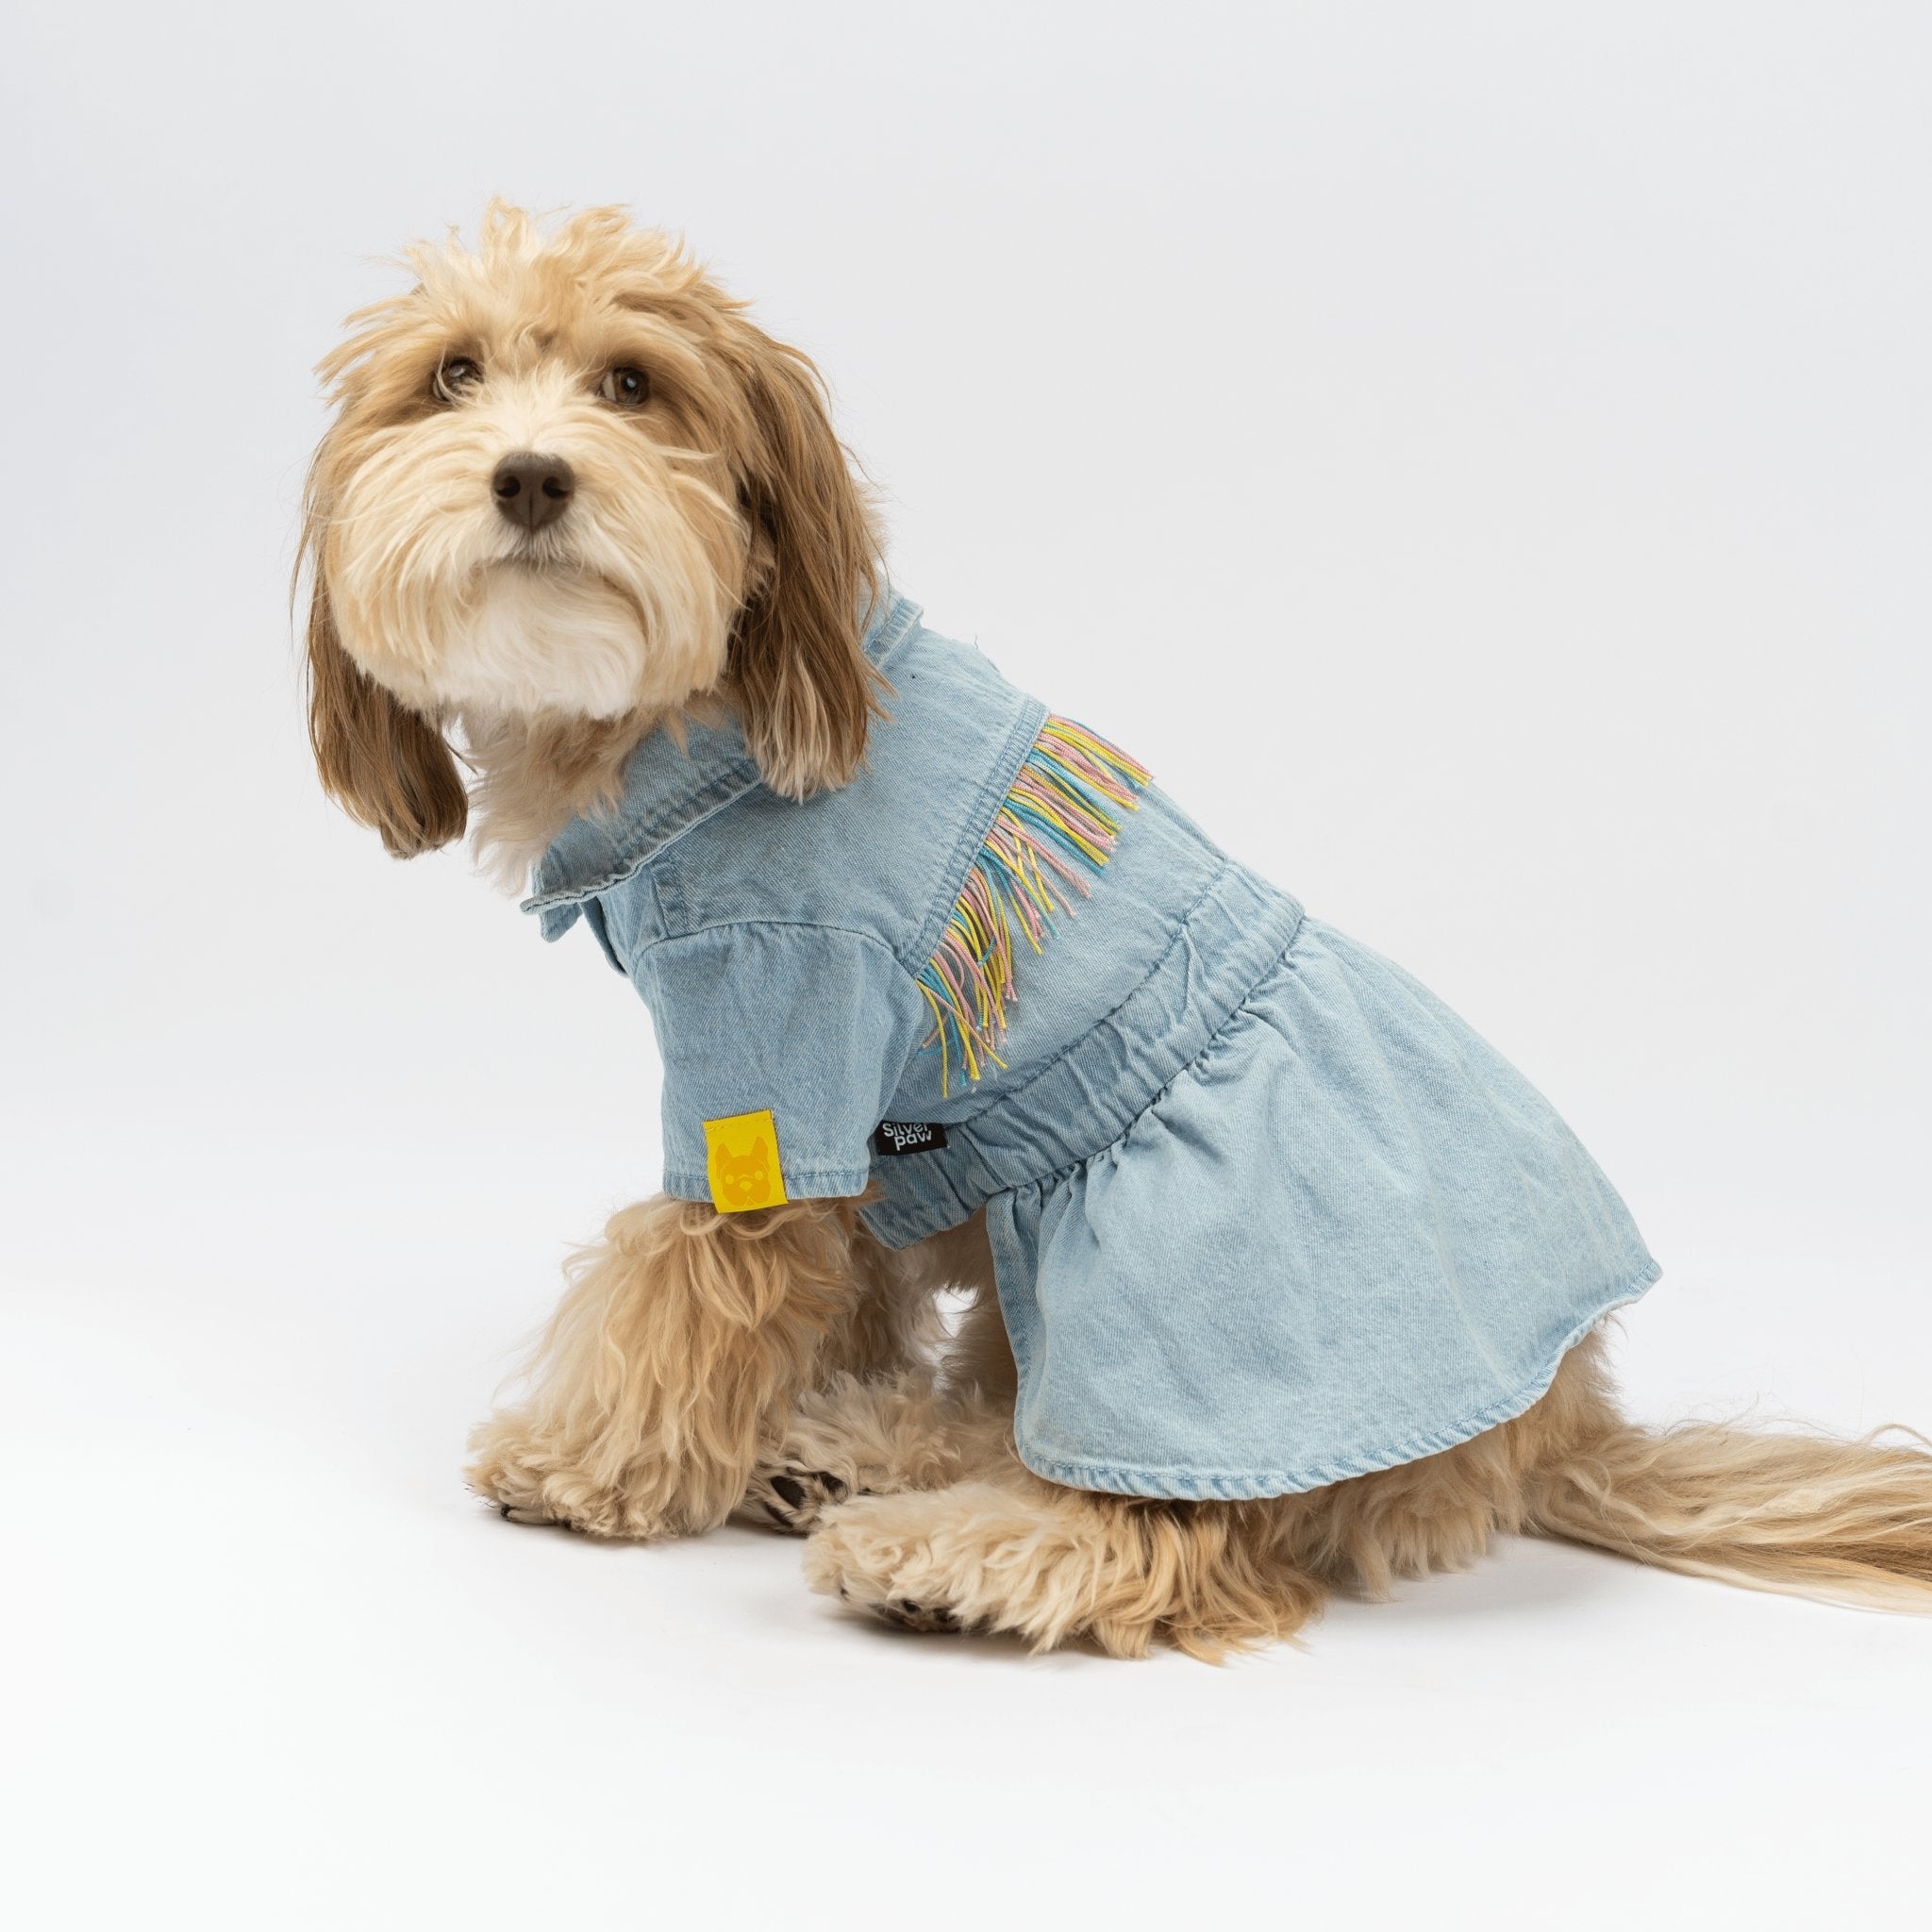 Summer Denim Dress For Small Breeds: Chihuahua, Poodle, York, And  Pomeranian Hand Made Dog Clothes From Liliooo, $12.43 | DHgate.Com